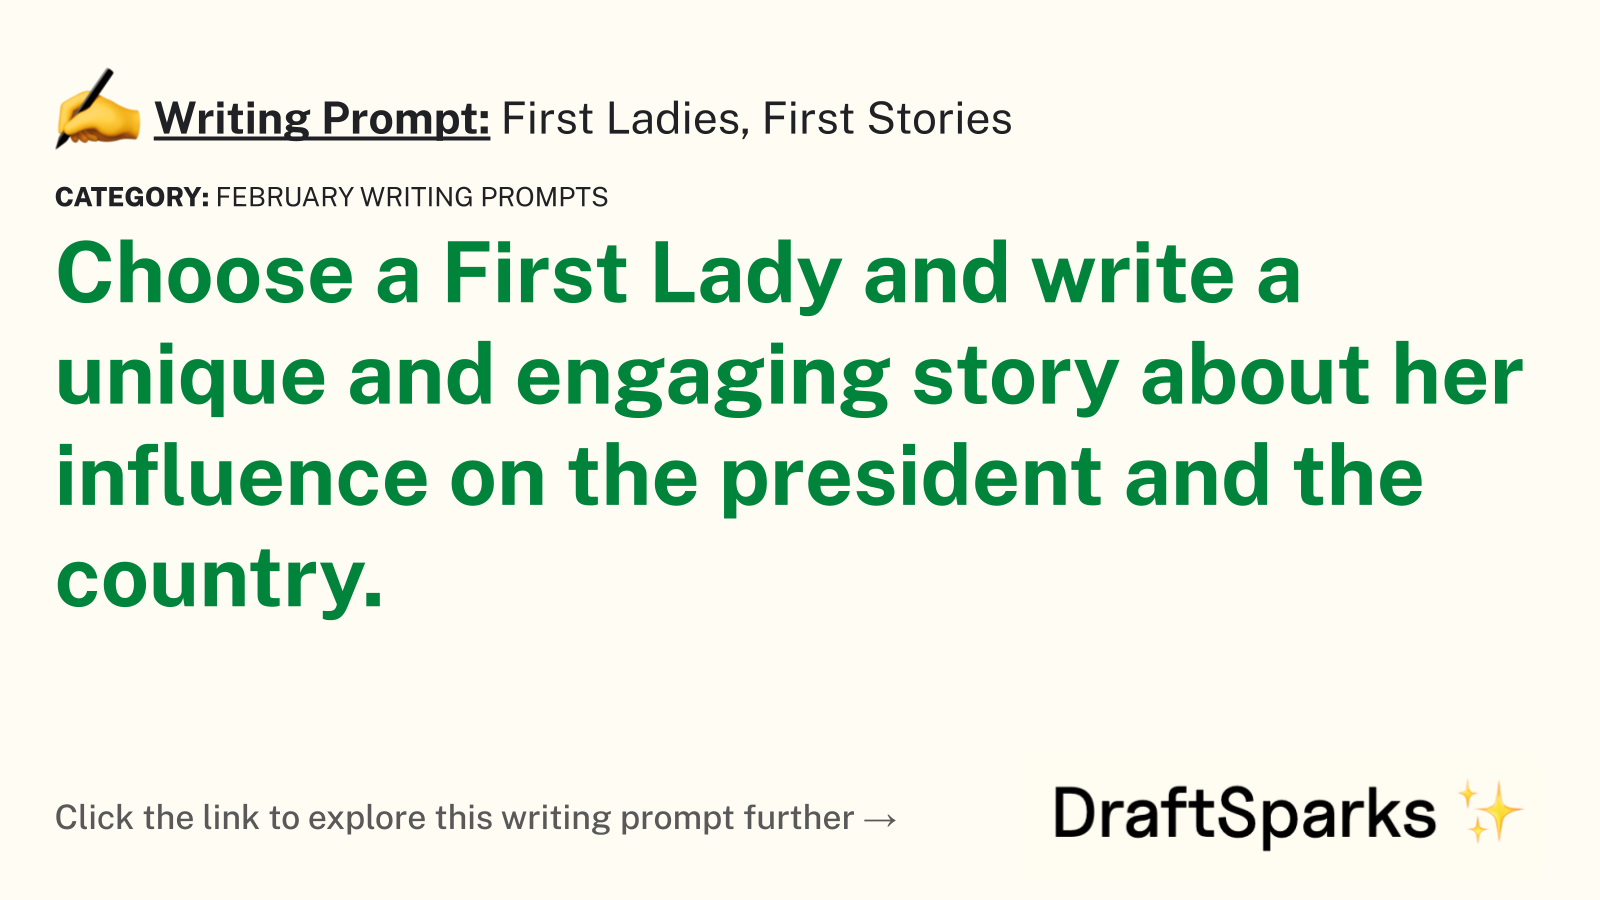 First Ladies, First Stories